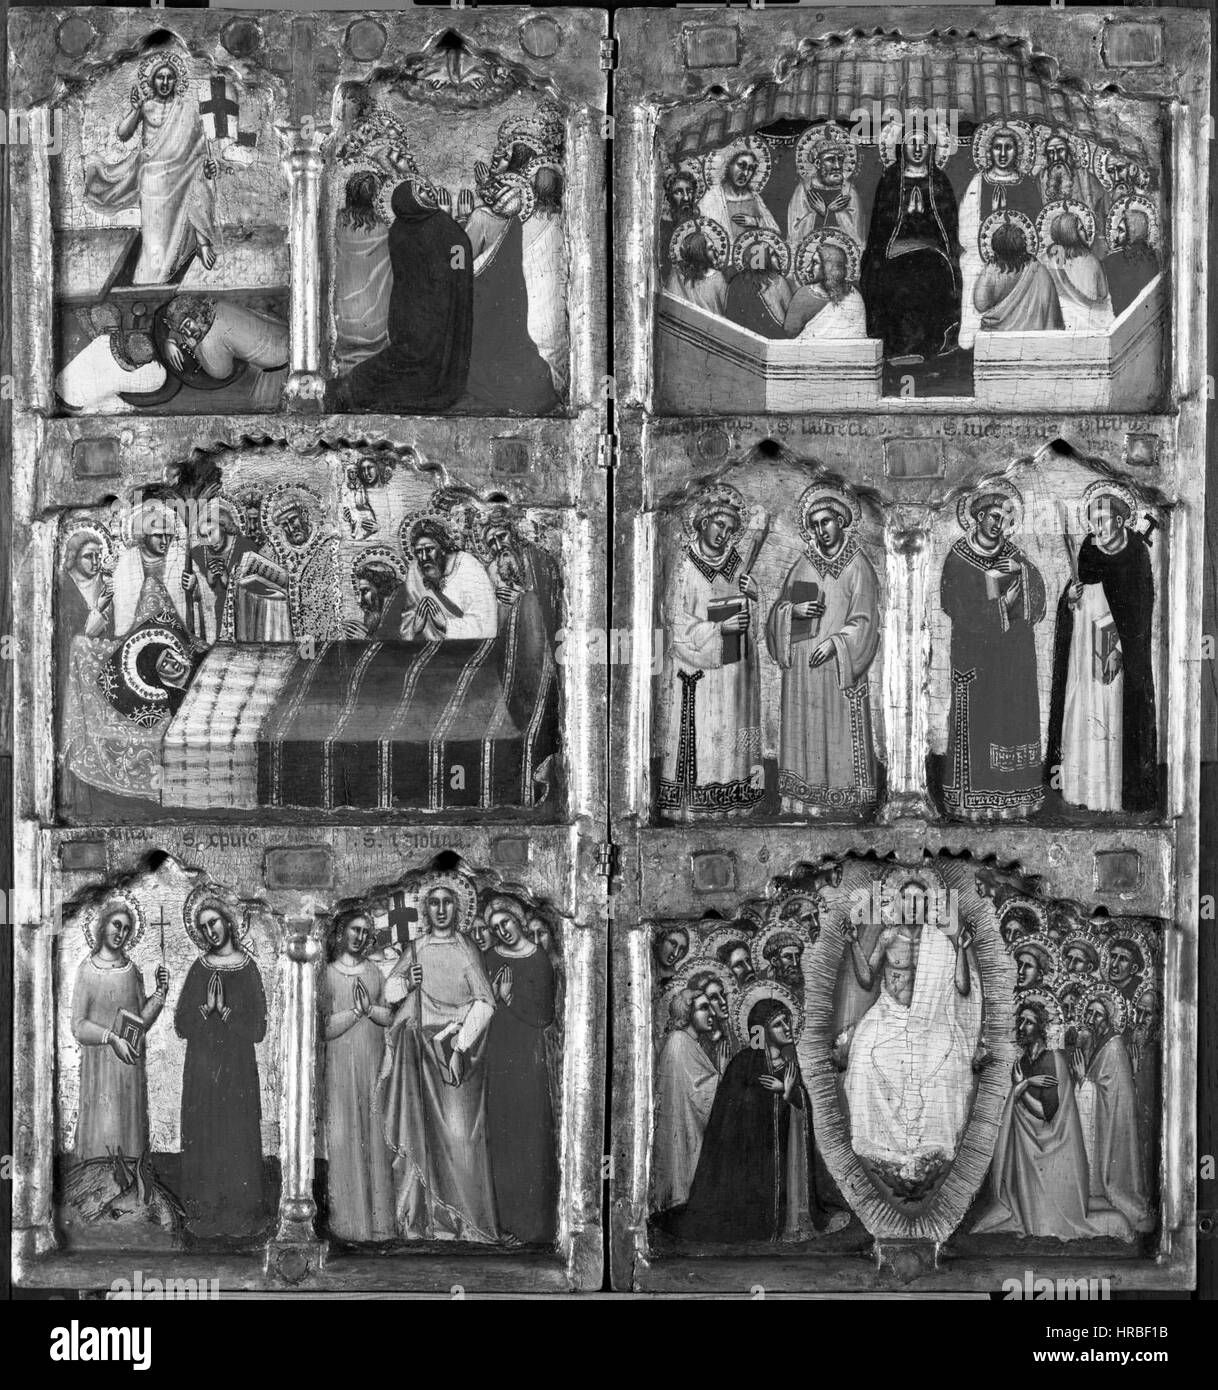 Simone dei Crocifissi - New Testament and Apocryphal Scenes with Saints - Walters 37723 Stock Photo